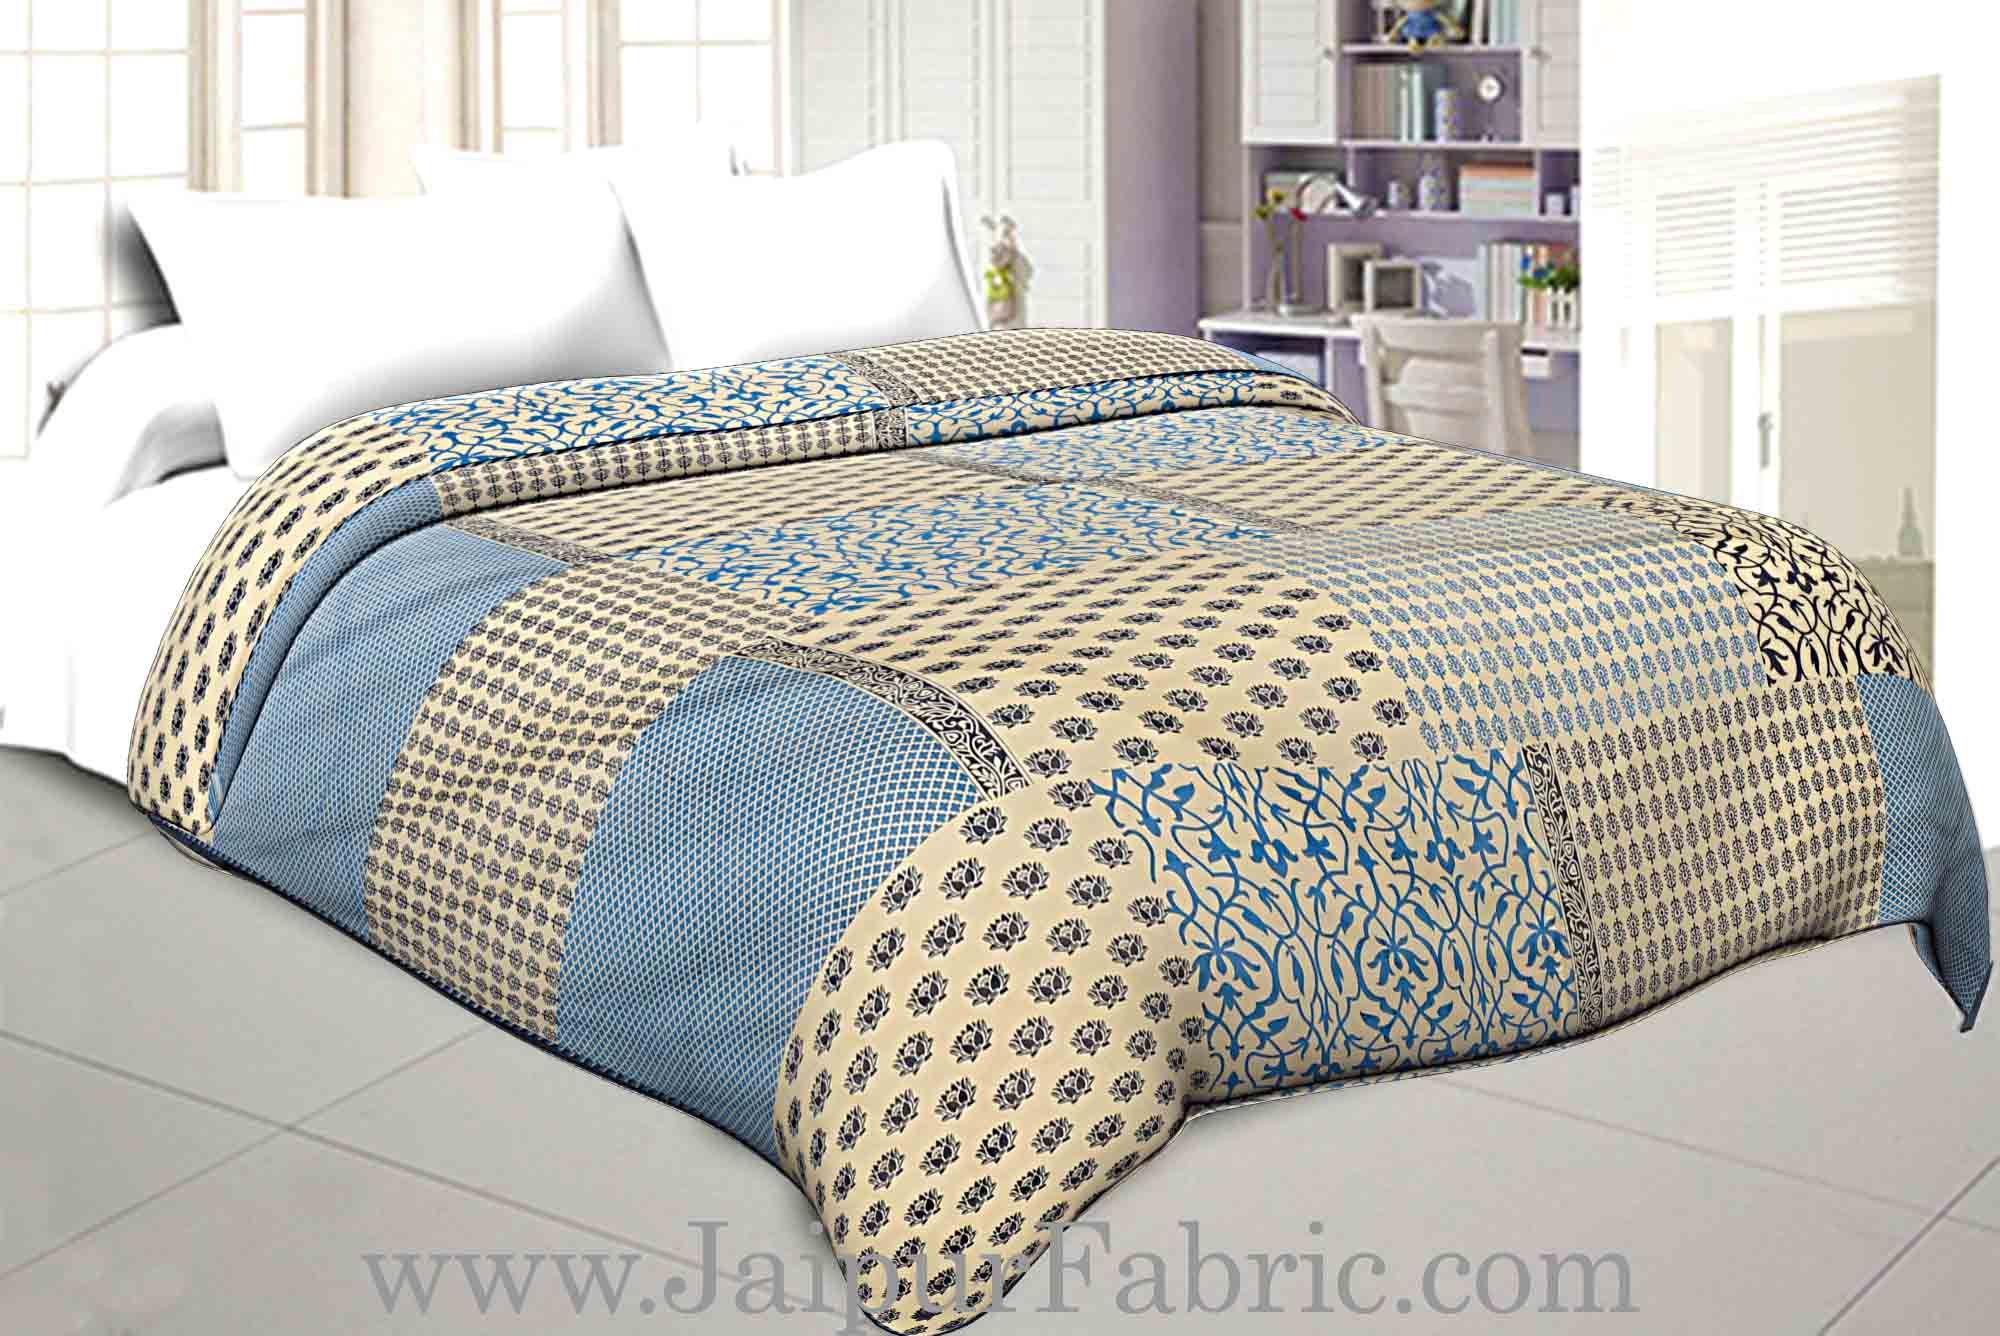 Double Bed Dohar Smooth Cotton Cover Small Boota Print Use As ( Blanket, Chaddar,Ac Quilt)